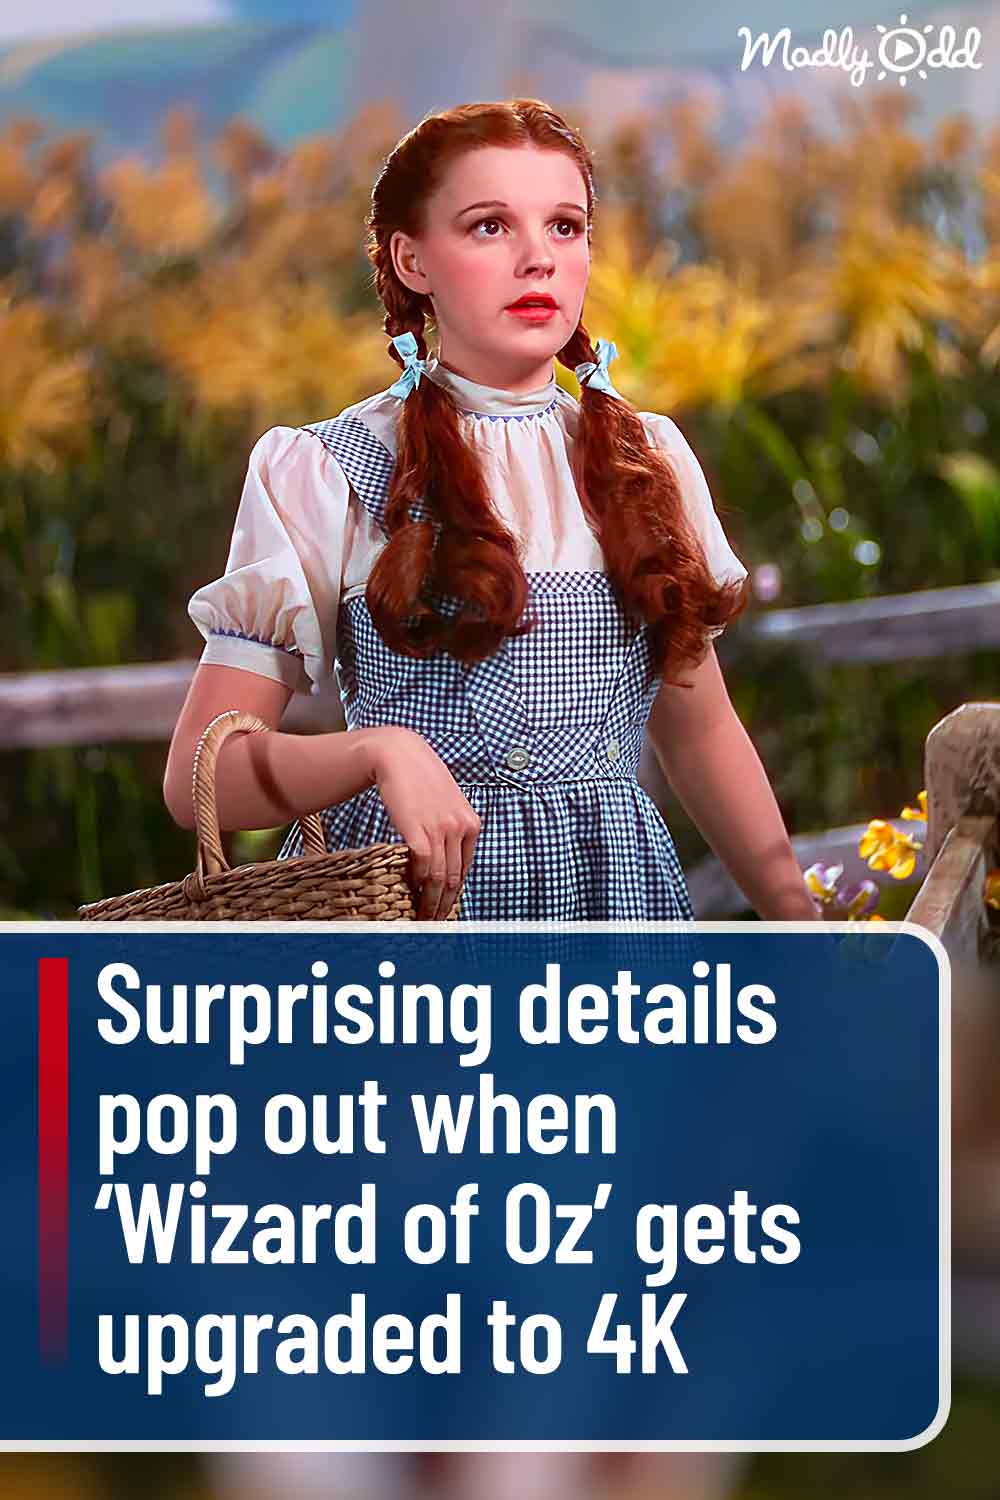 Surprising details pop out when ‘Wizard of Oz’ gets upgraded to 4K